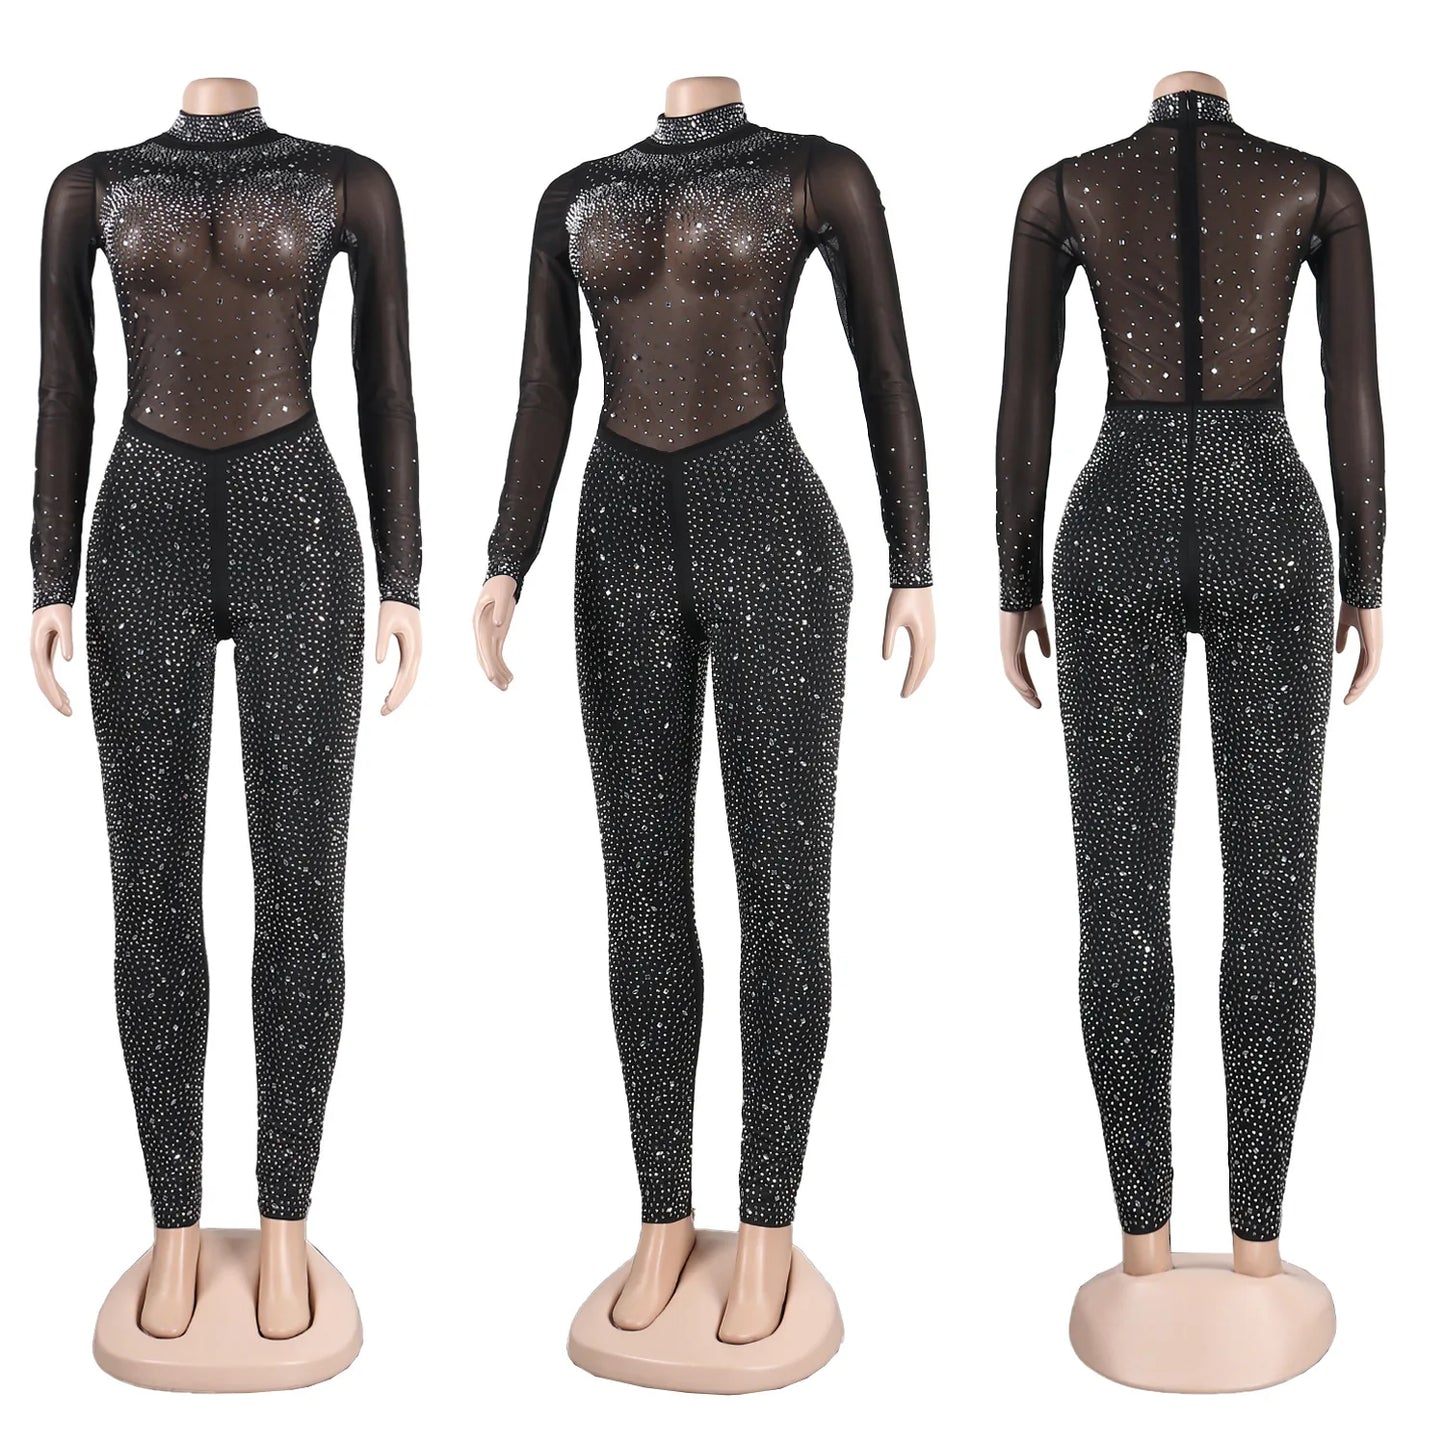 Mesh See Though Diamonds Jumpsuits